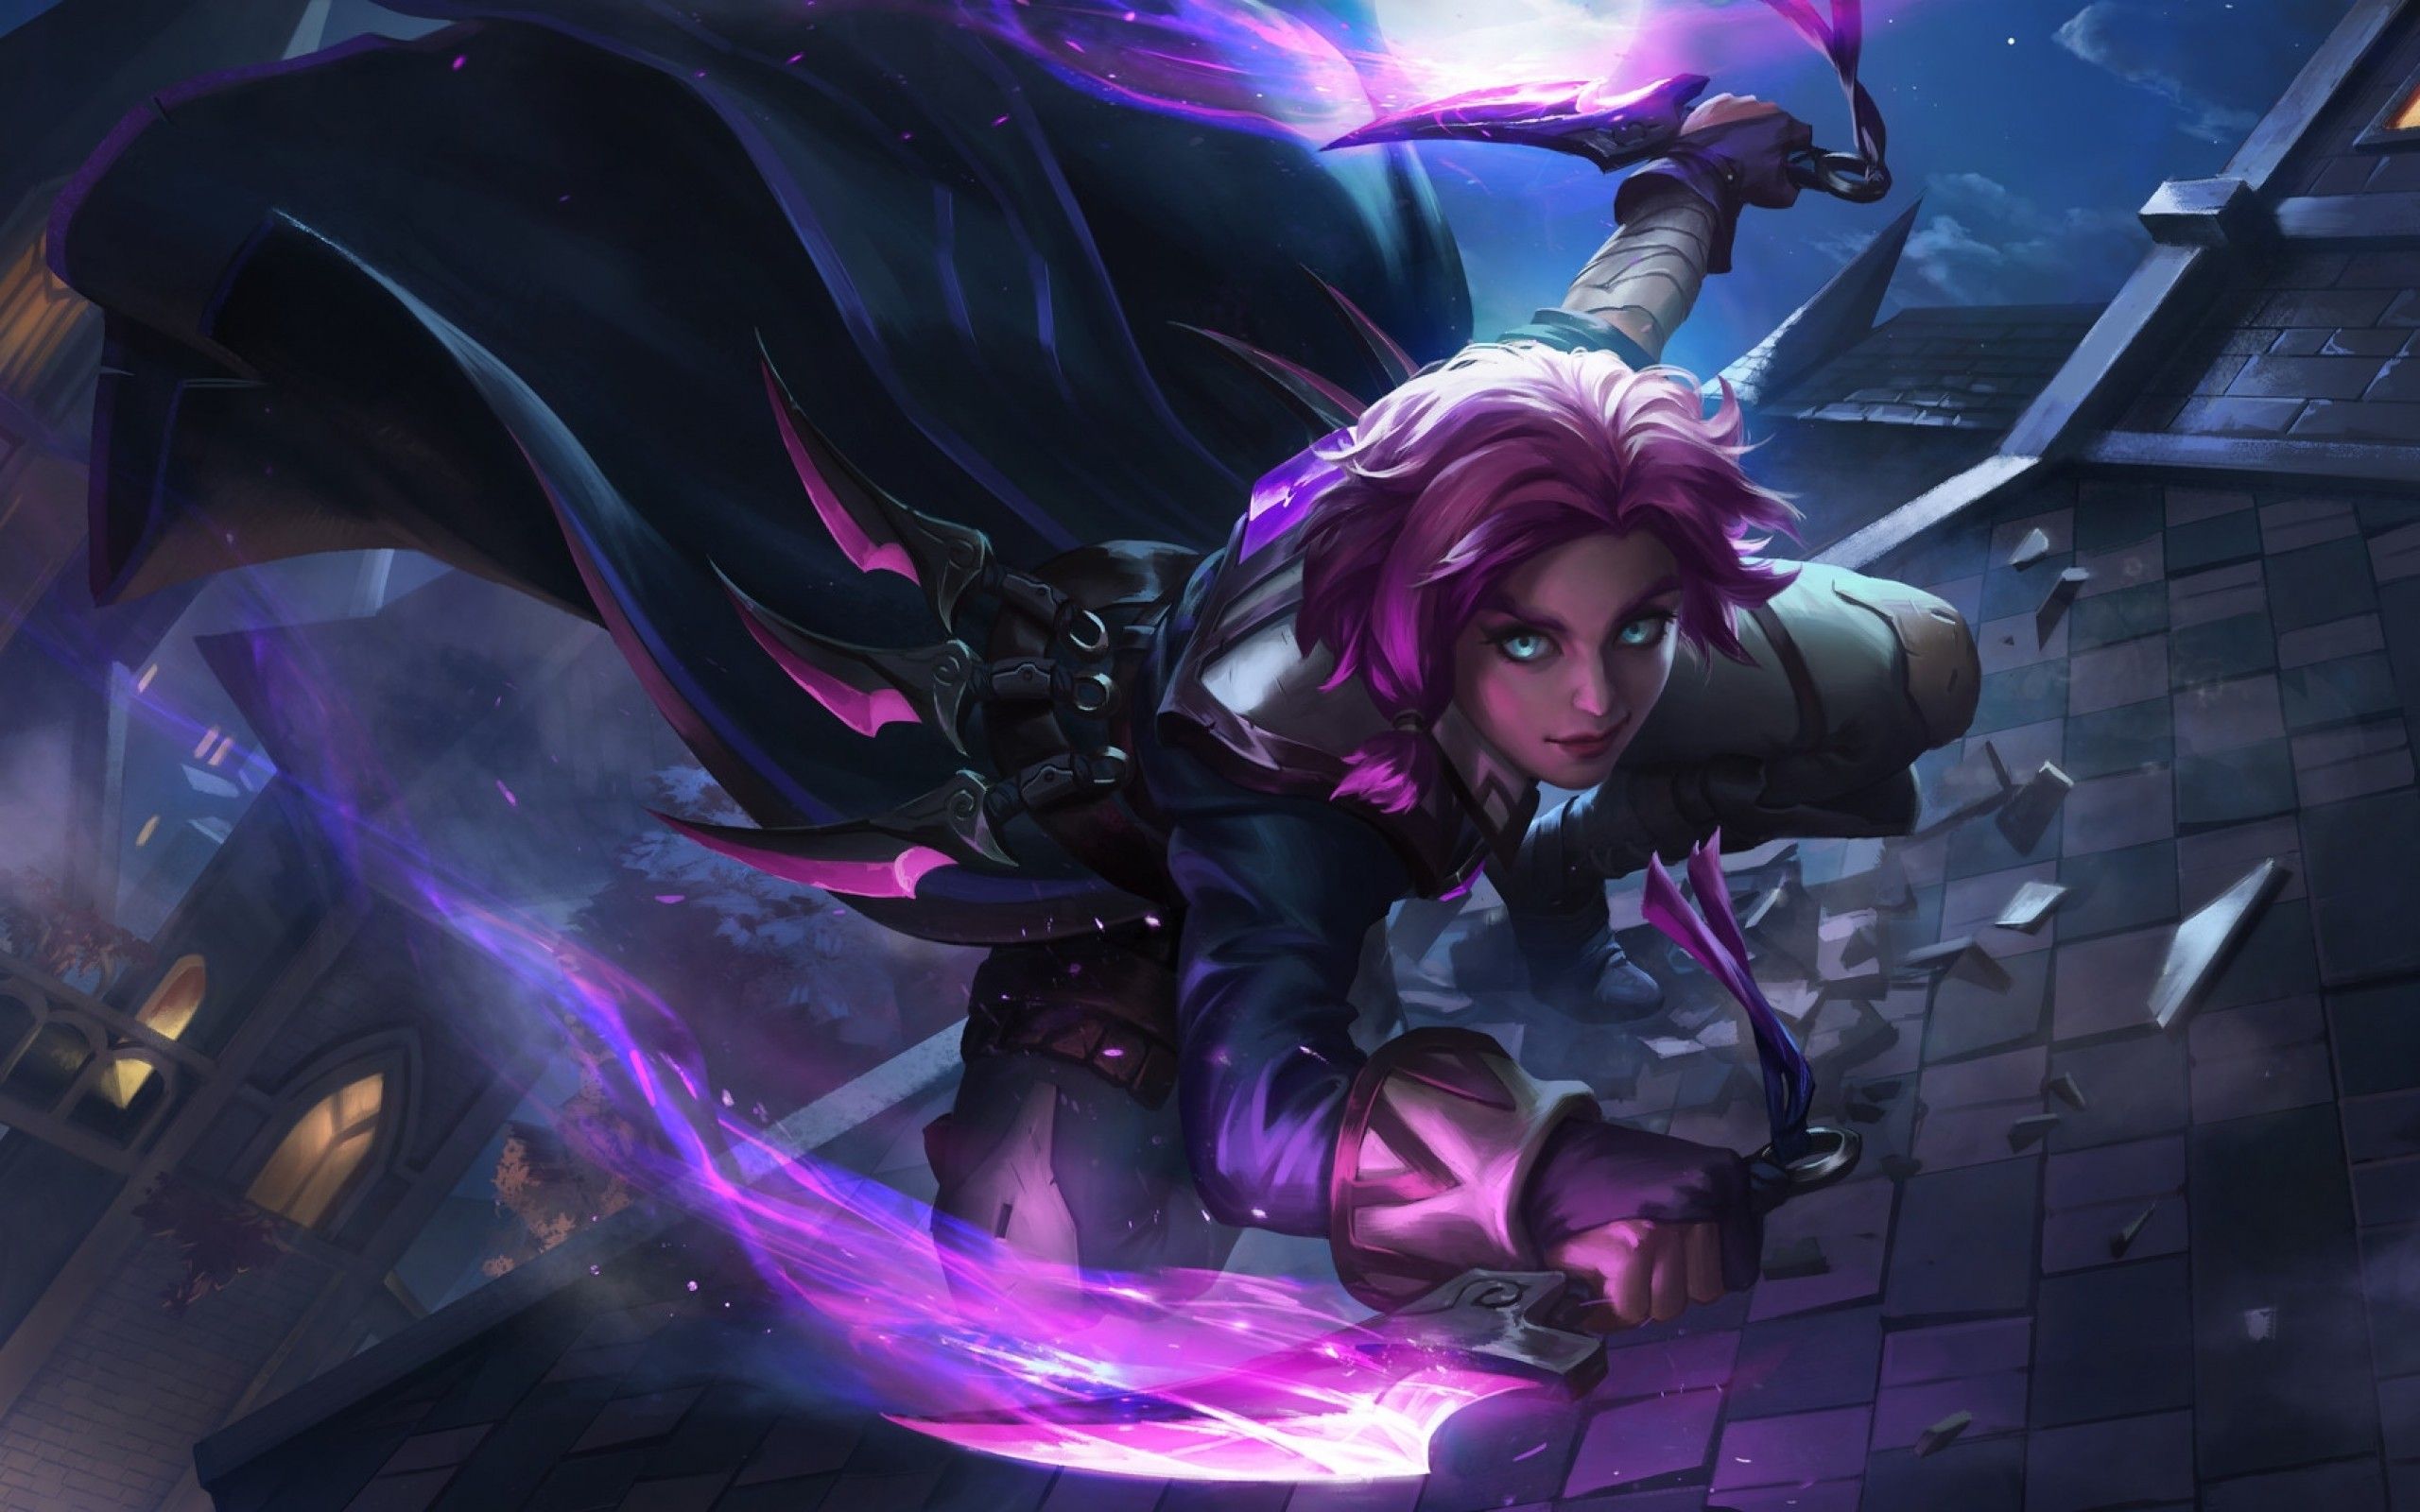 Download 2560x1600 Paladins Champions Of The Realm, Maeve, Blades